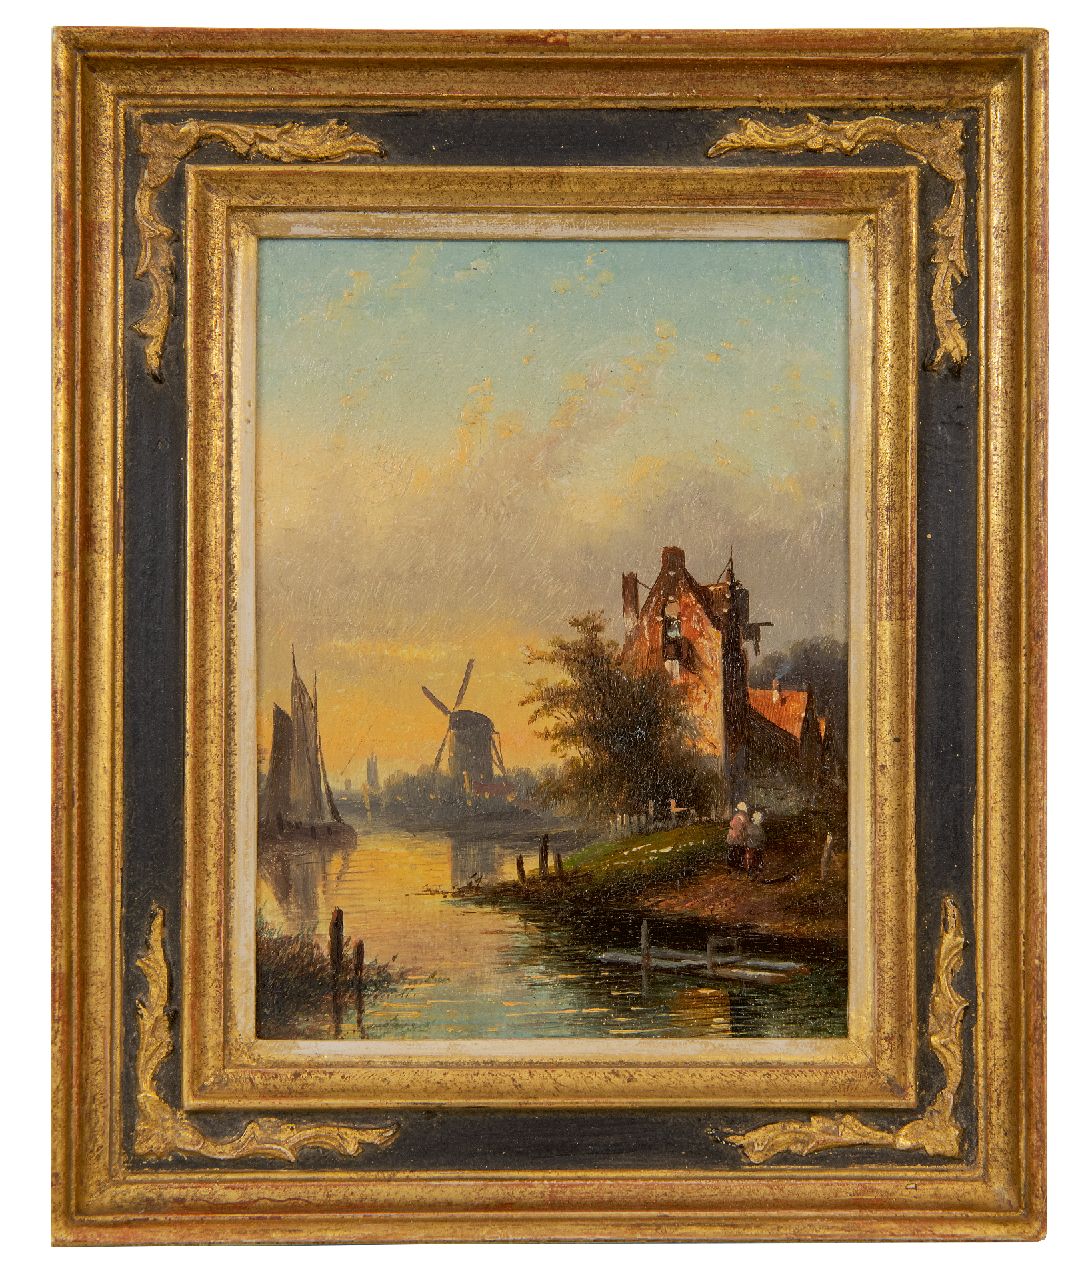 Spohler J.J.C.  | Jacob Jan Coenraad Spohler | Paintings offered for sale | River landscape with sailing ship, figures and windmill, oil on panel 16.0 x 11.9 cm